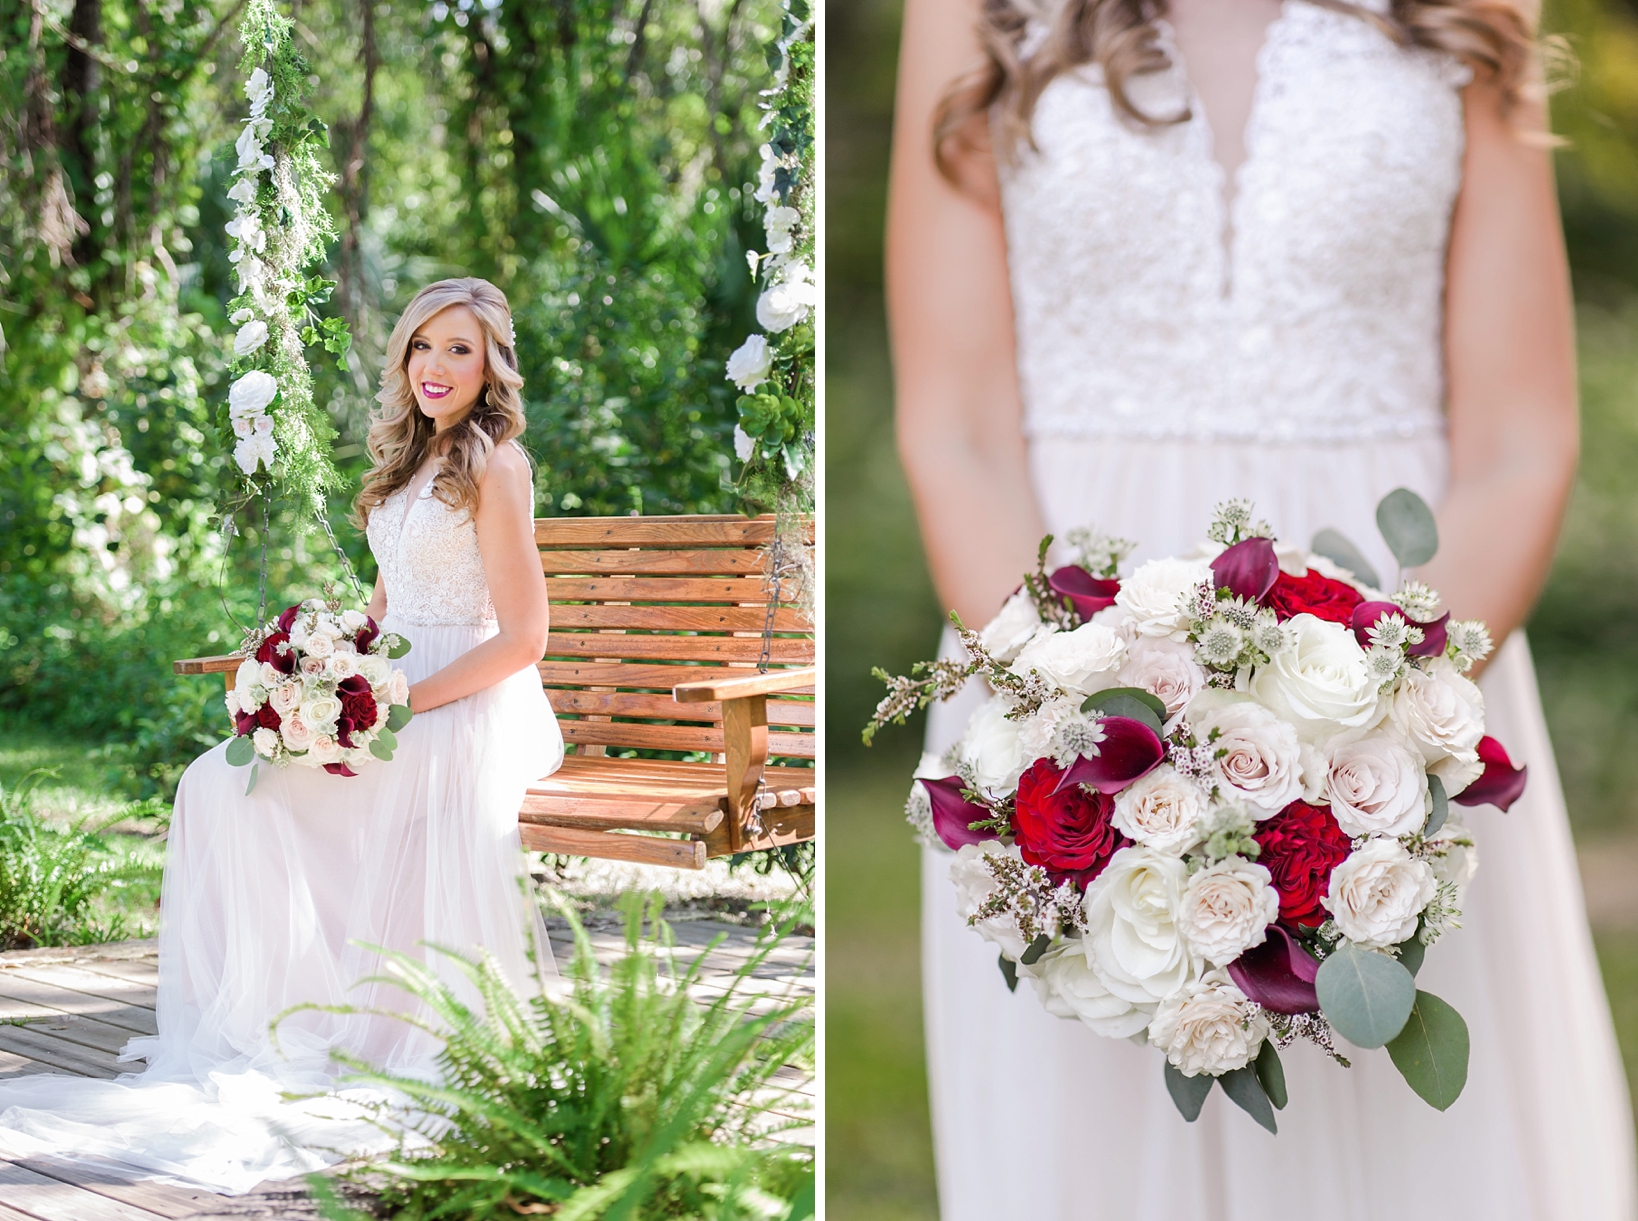 Bridal portrait and the huge floral bouquet of roses by Sarah & Ben Photography 